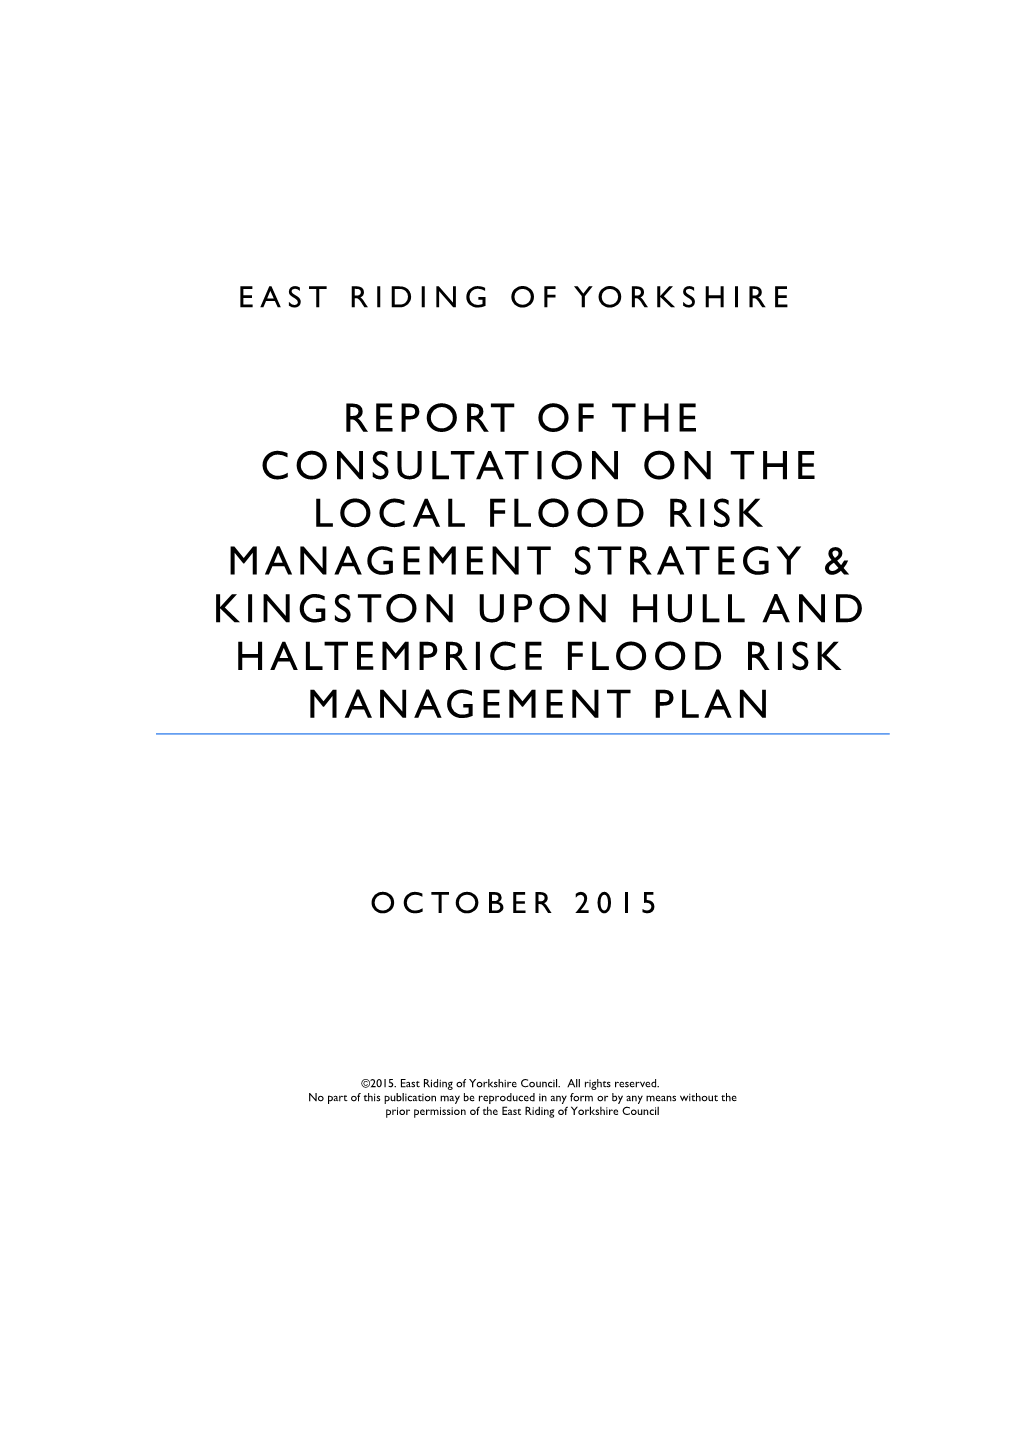 Report of the Consultation on the Loc Al Flood Risk Management Strategy & Kingston Upon Hull a Nd Haltemprice Flood Ri Sk Management Plan